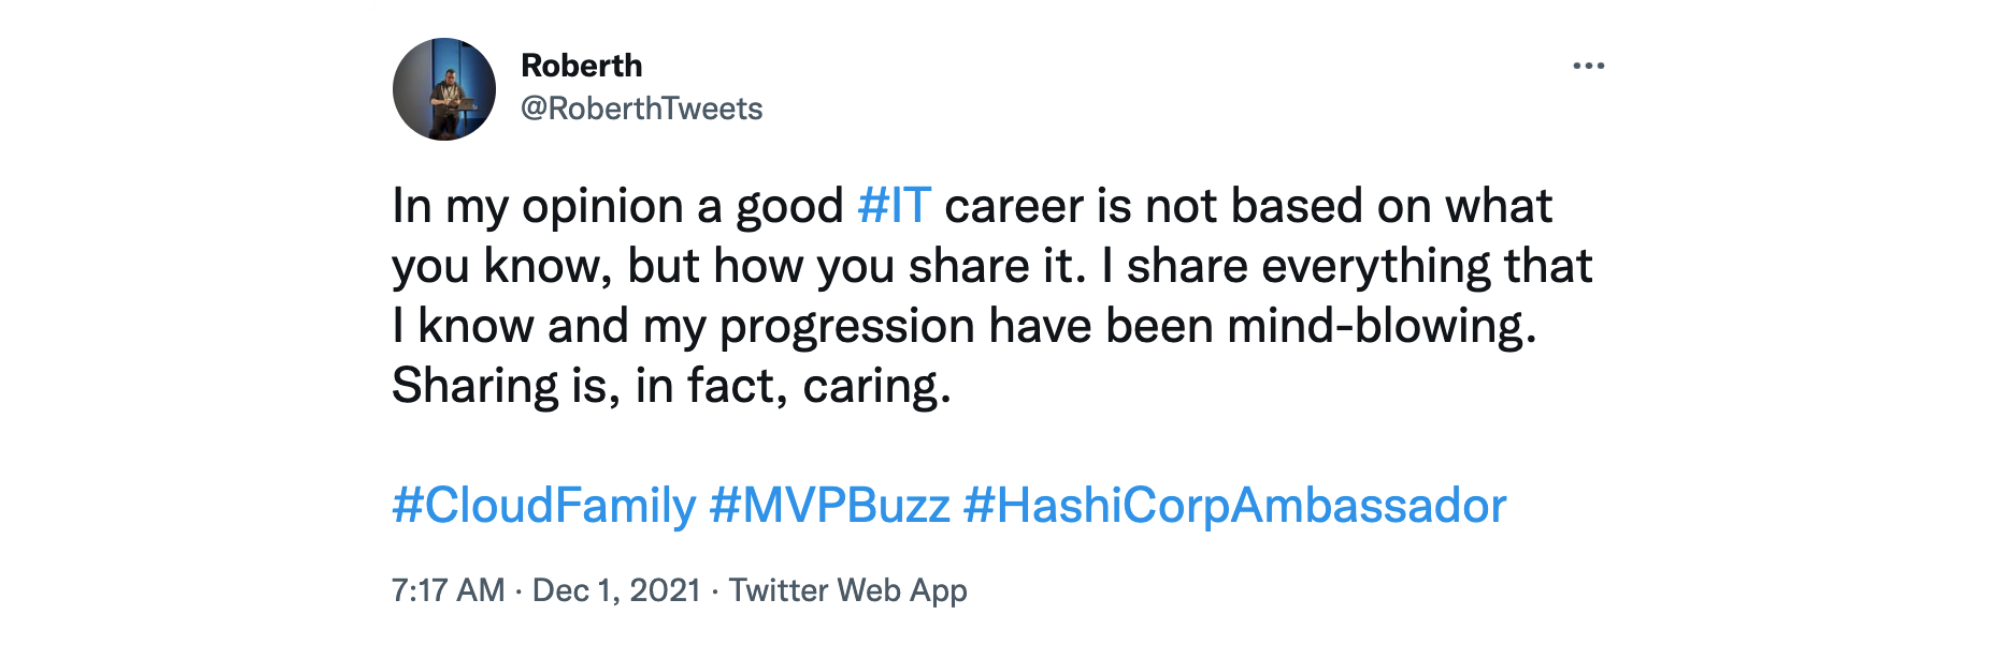 In my opinion a good #IT career is not based on what you know, but how you share it. I share everything that I know and my progression have been mind-blowing. Sharing is, in fact, caring.